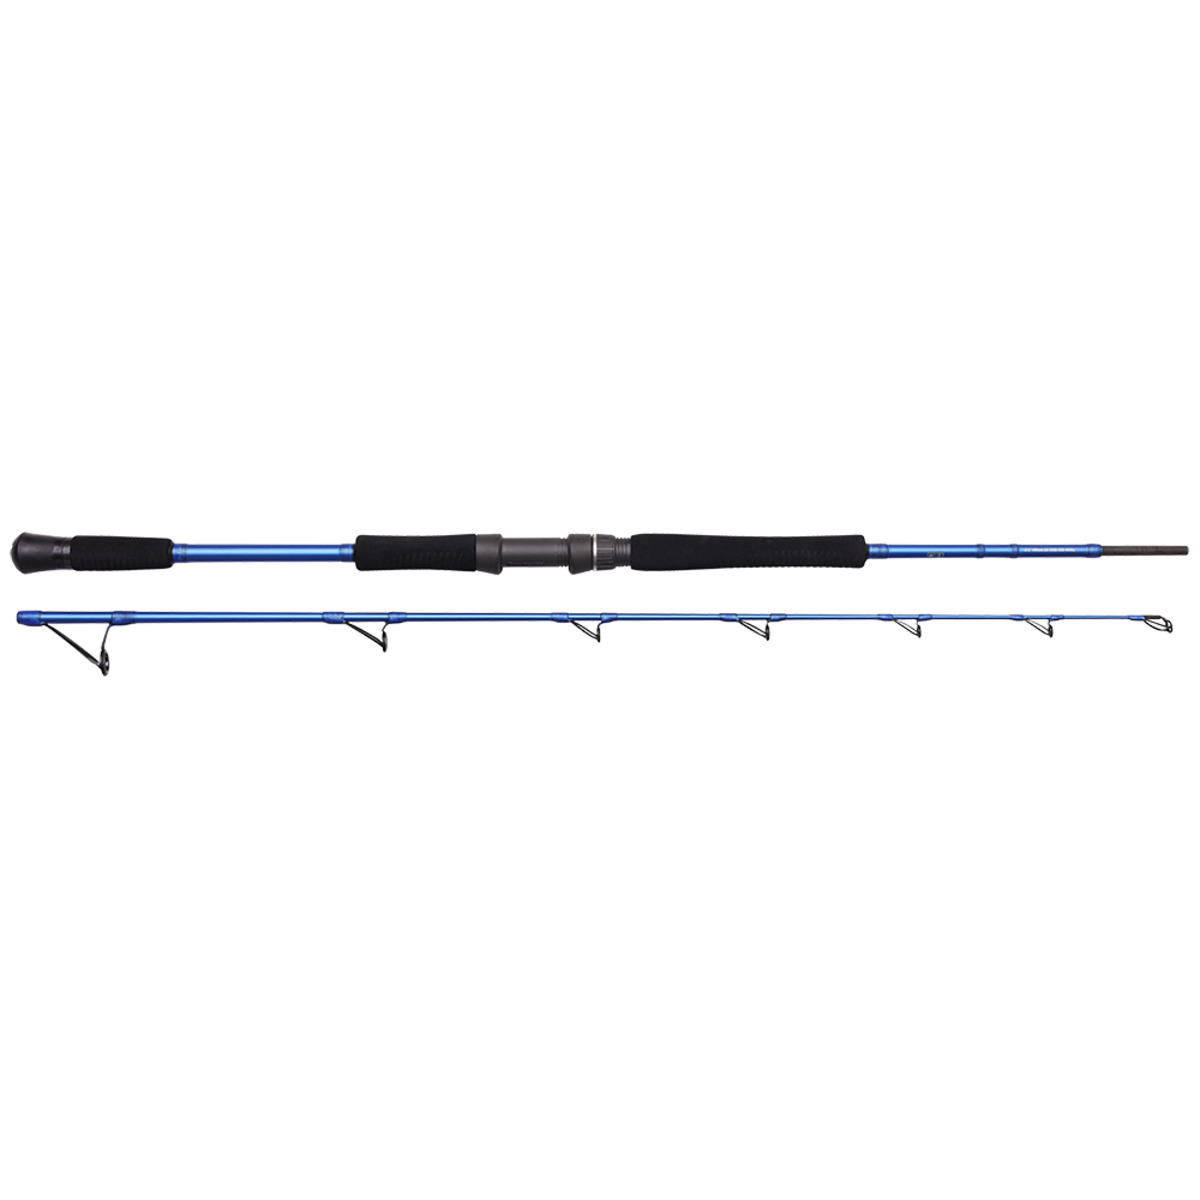 Savage Gear Sgs4 Boat Game - 7 ft 5in/2.26M MF 150-400G/XH 20-30LB 2SEC